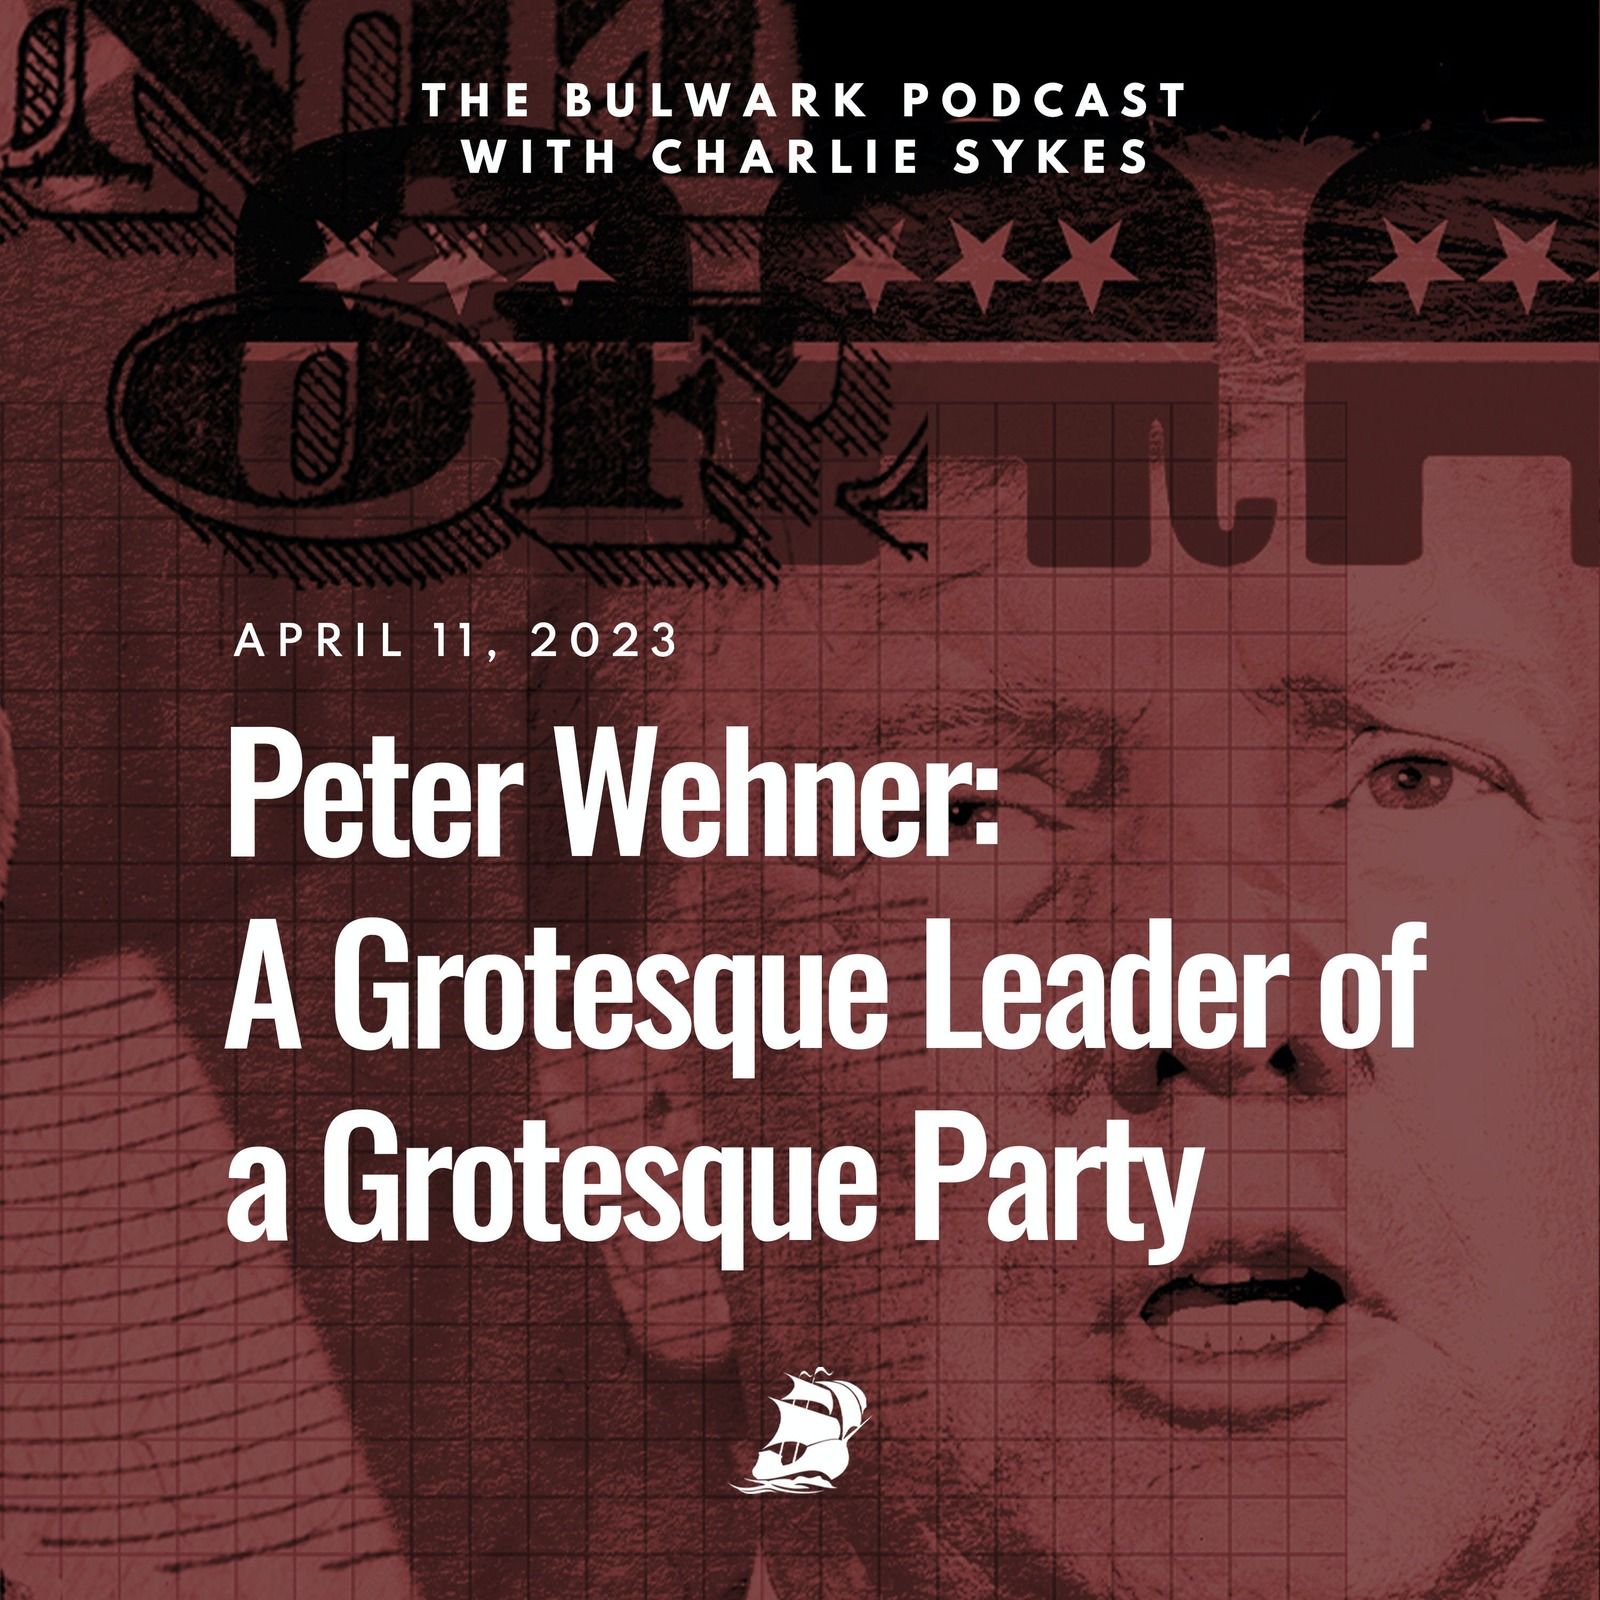 Peter Wehner: A Grotesque Leader of a Grotesque Party by The Bulwark Podcast